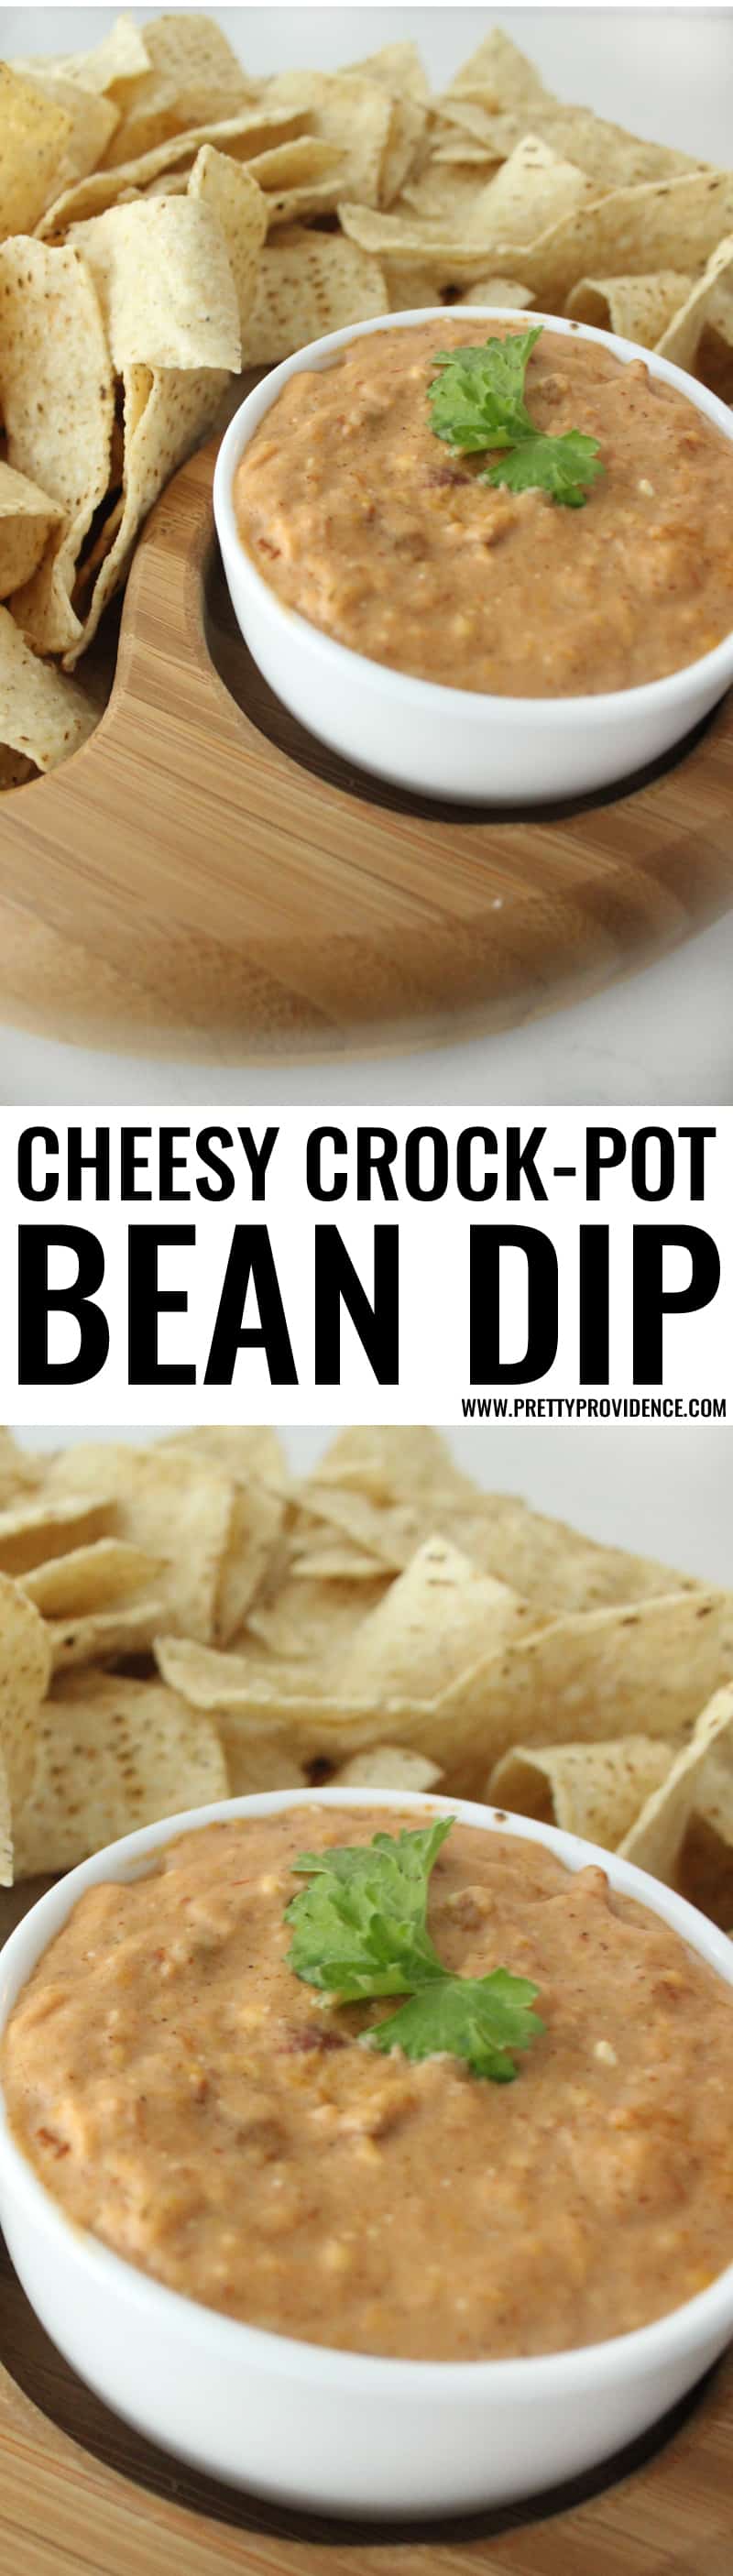 This cheesy crock pot bean dip is AMAZING!! Definitely my go-to recipe for any party or gathering-- a total crowd pleaser! 